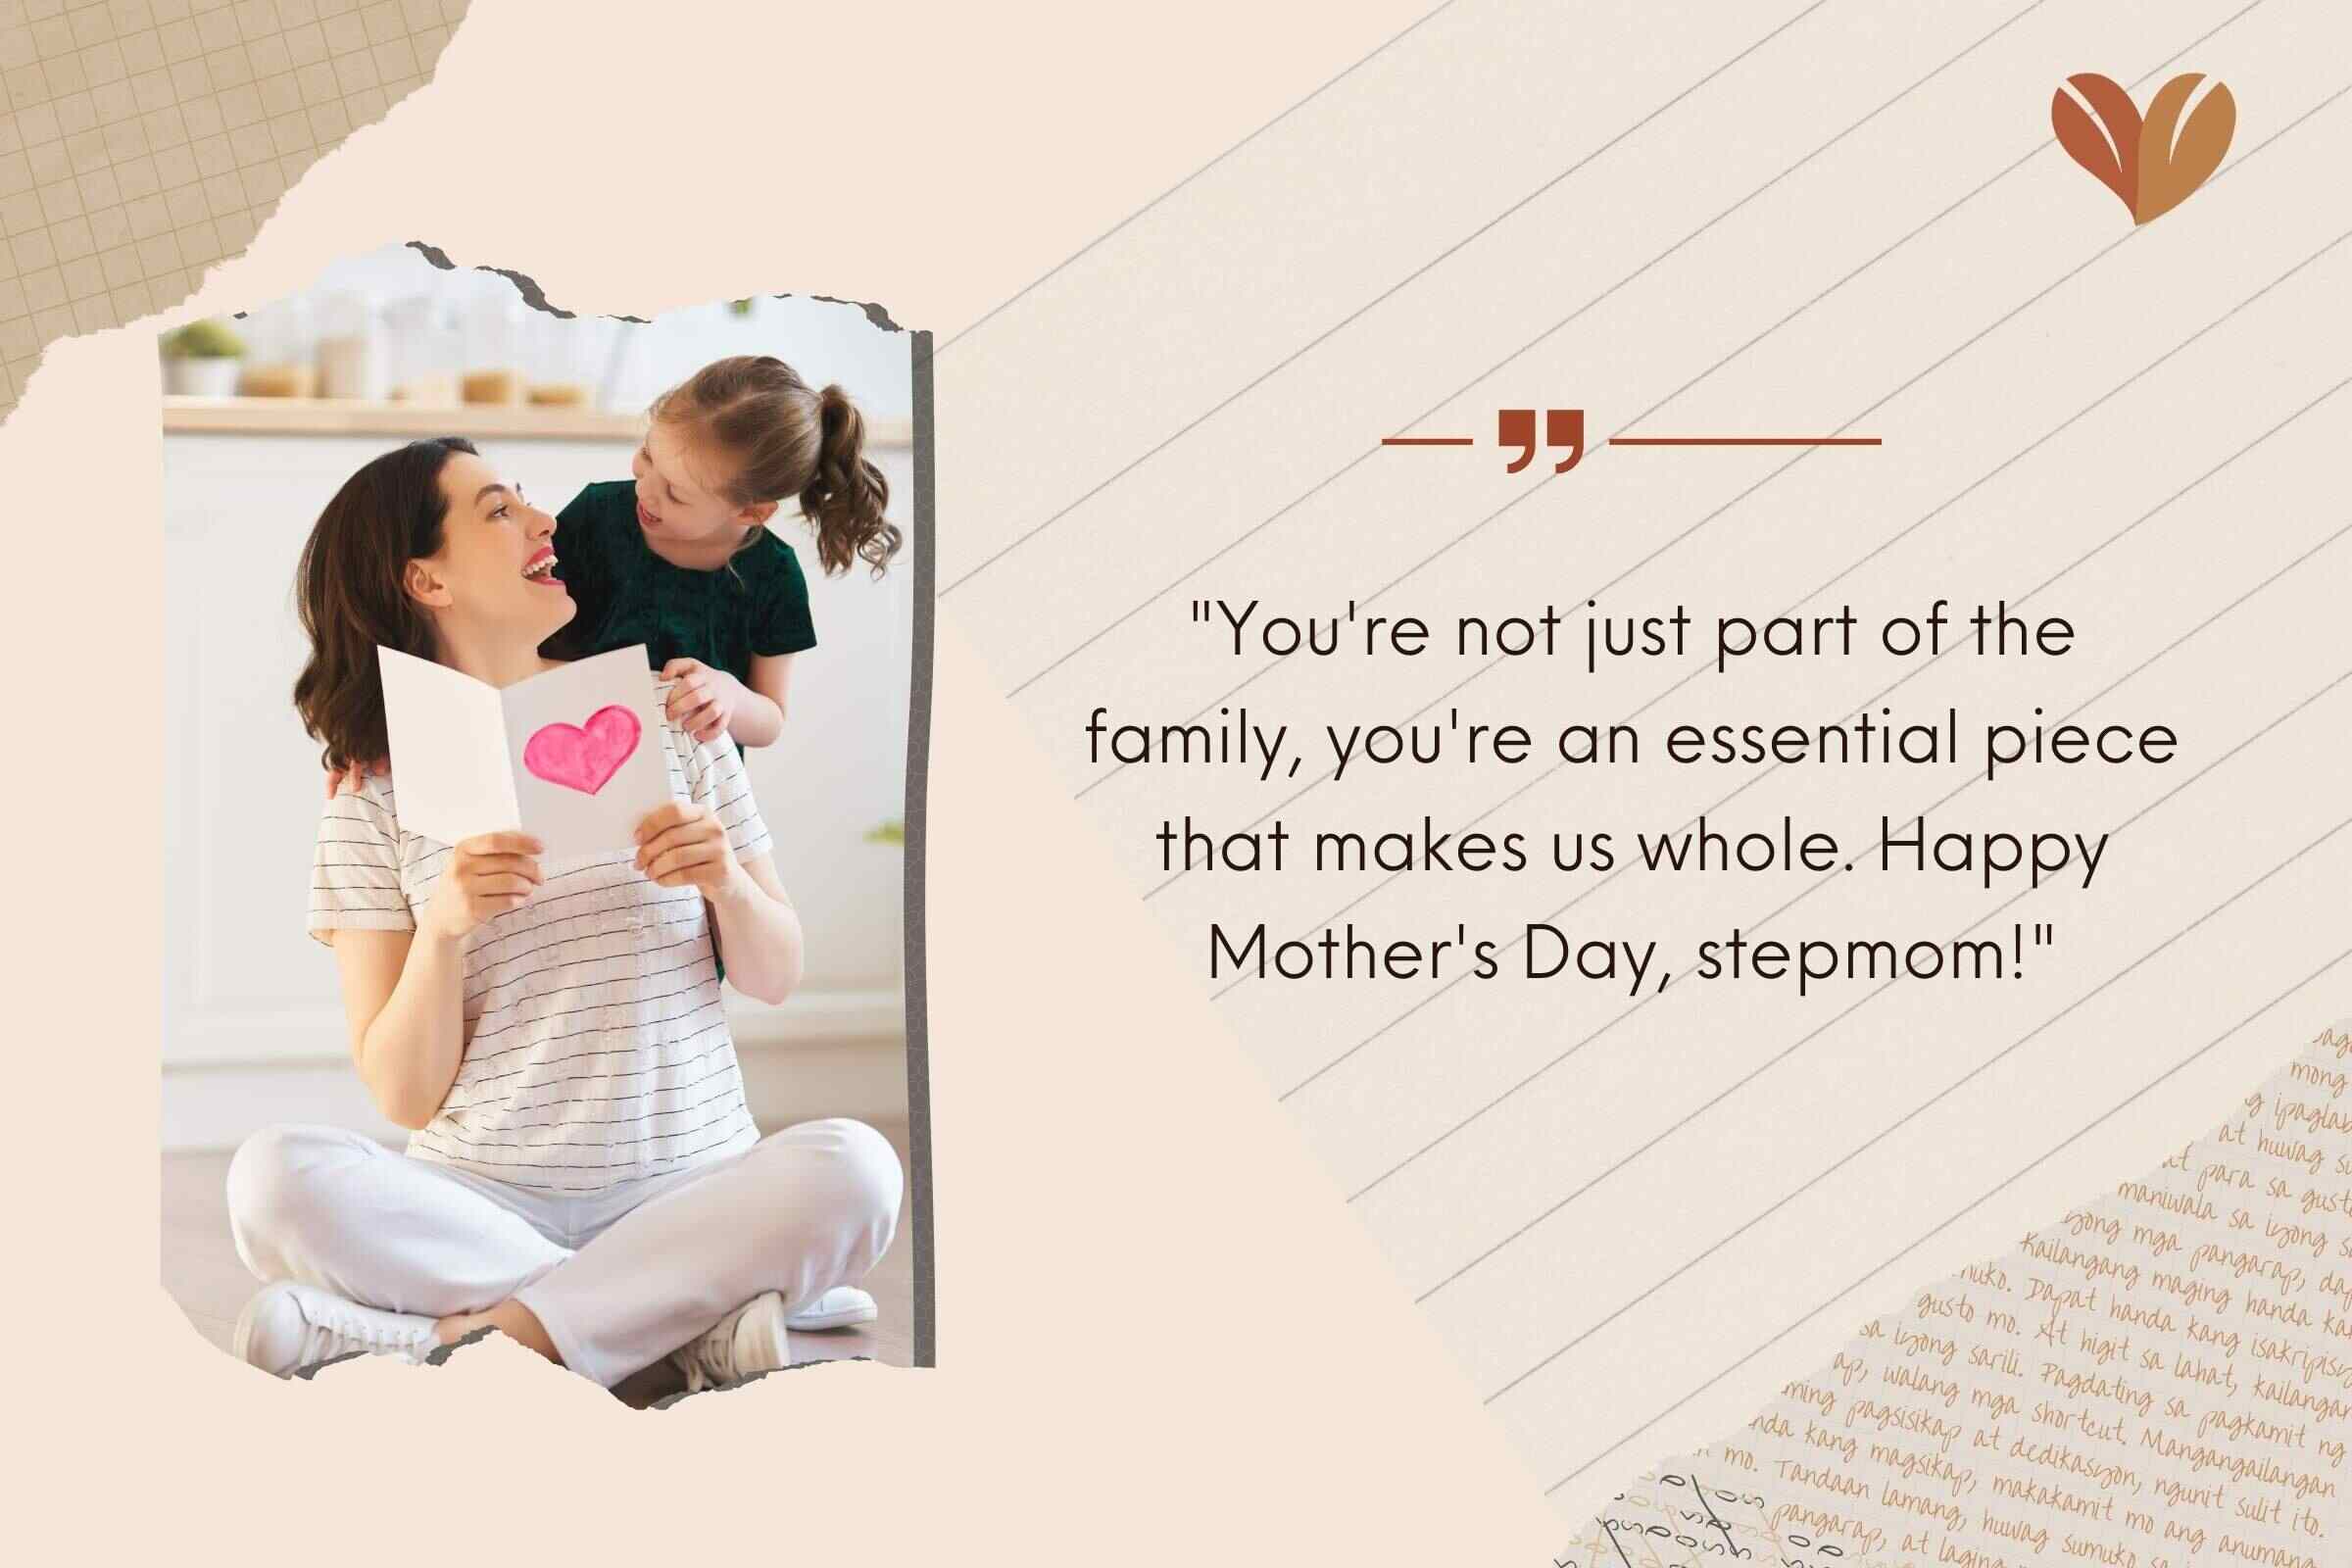 Mother's Day Card Sayings for Stepmoms to Make Her Giggle